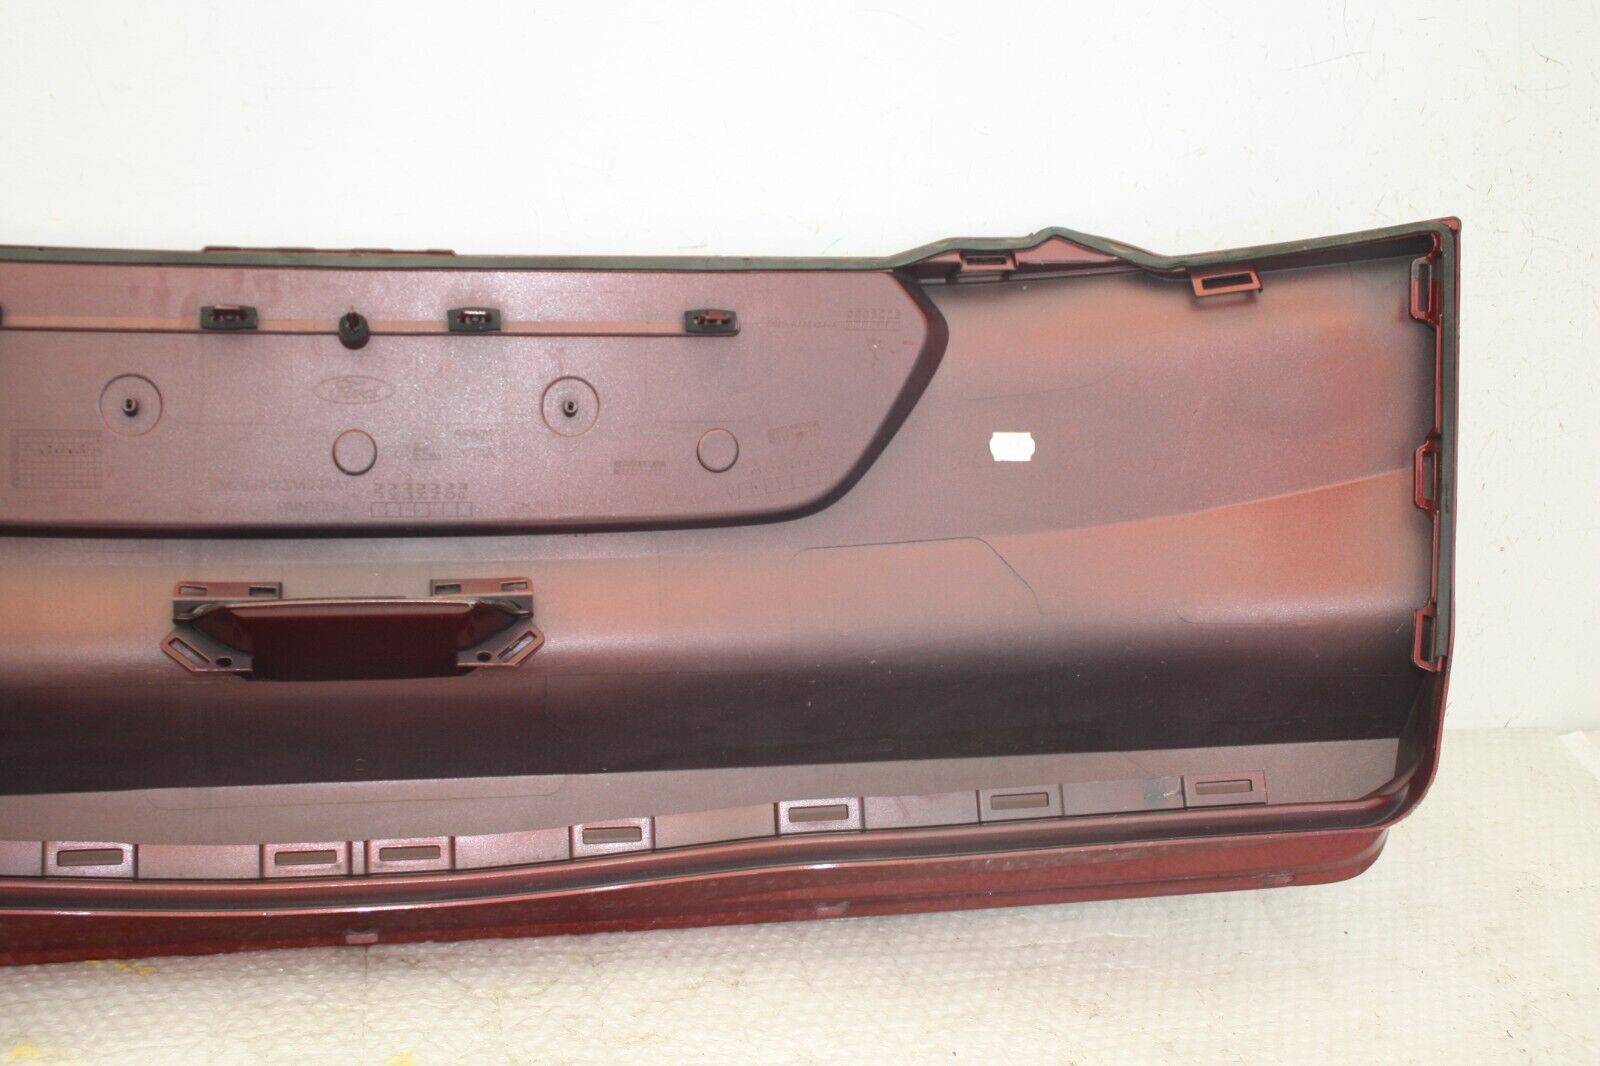 Ford-S-Max-Tailgate-Boot-Lid-Lower-Section-2015-To-2019-EM2B-R423A40-DAMAGED-176368251073-15